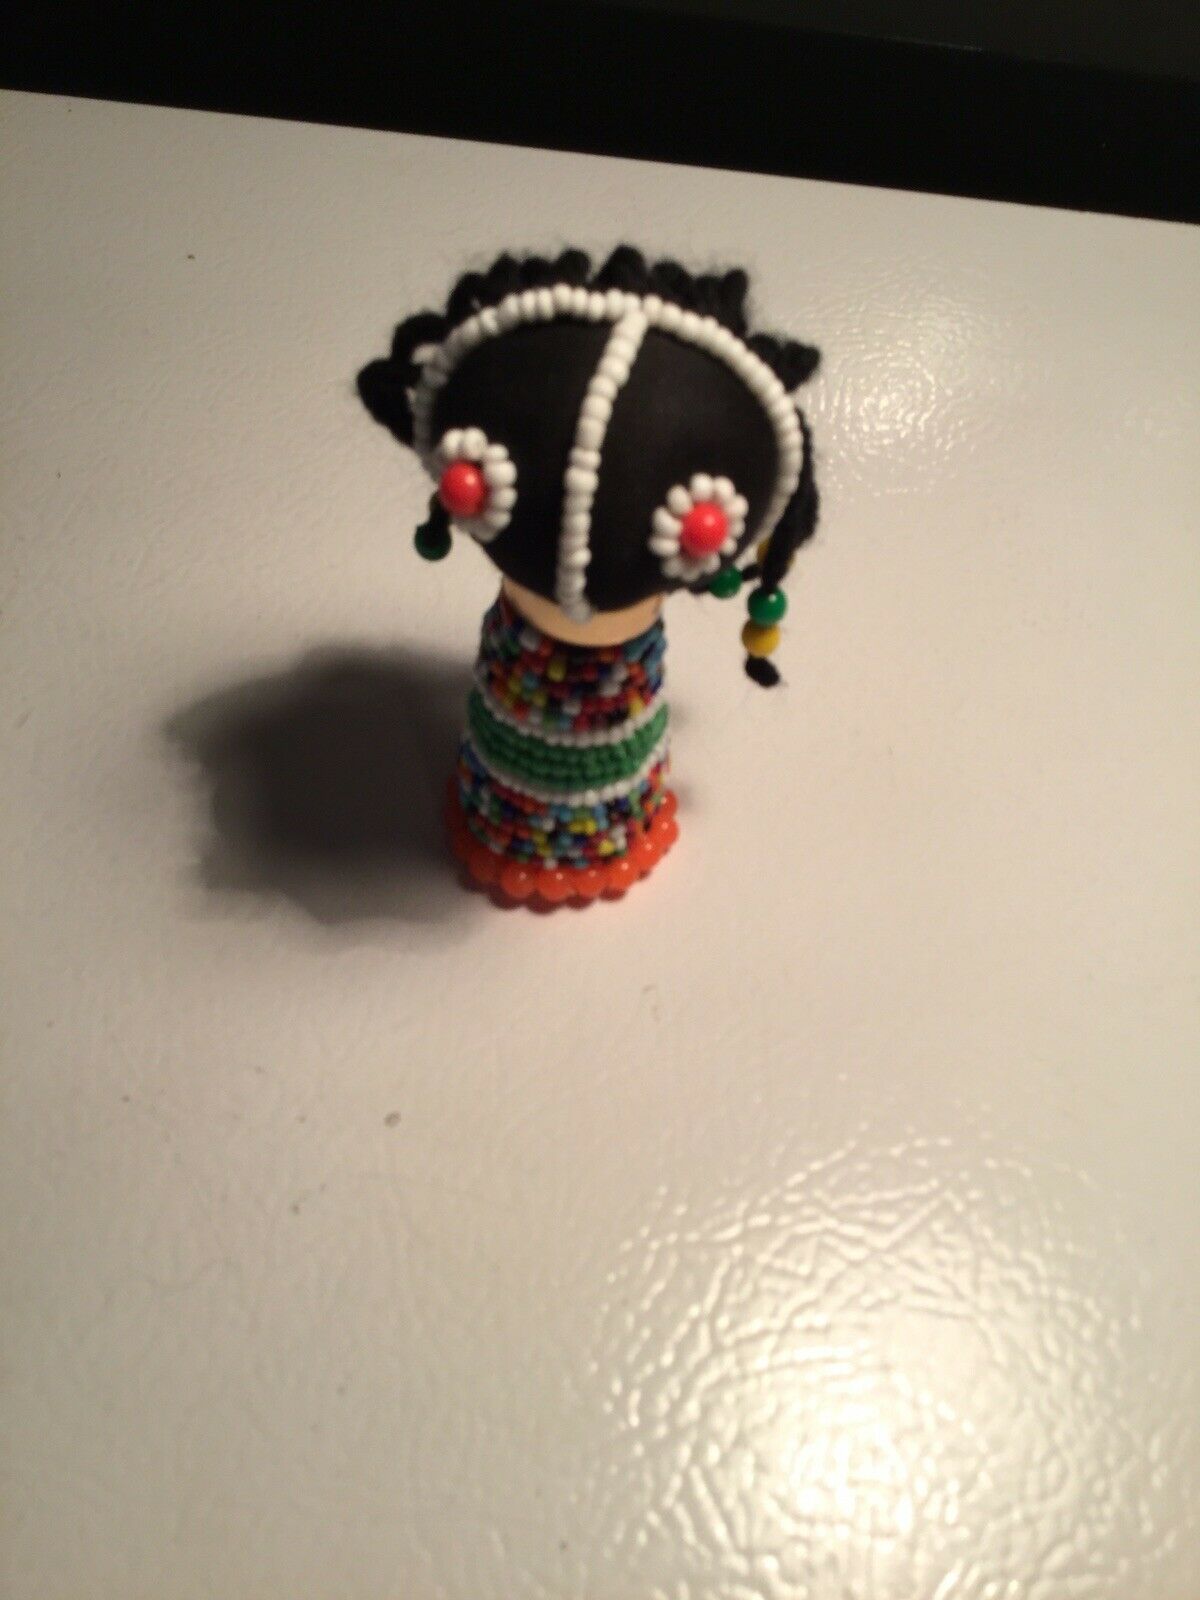 Hand Made Beaded Senegal Collectible Dolls